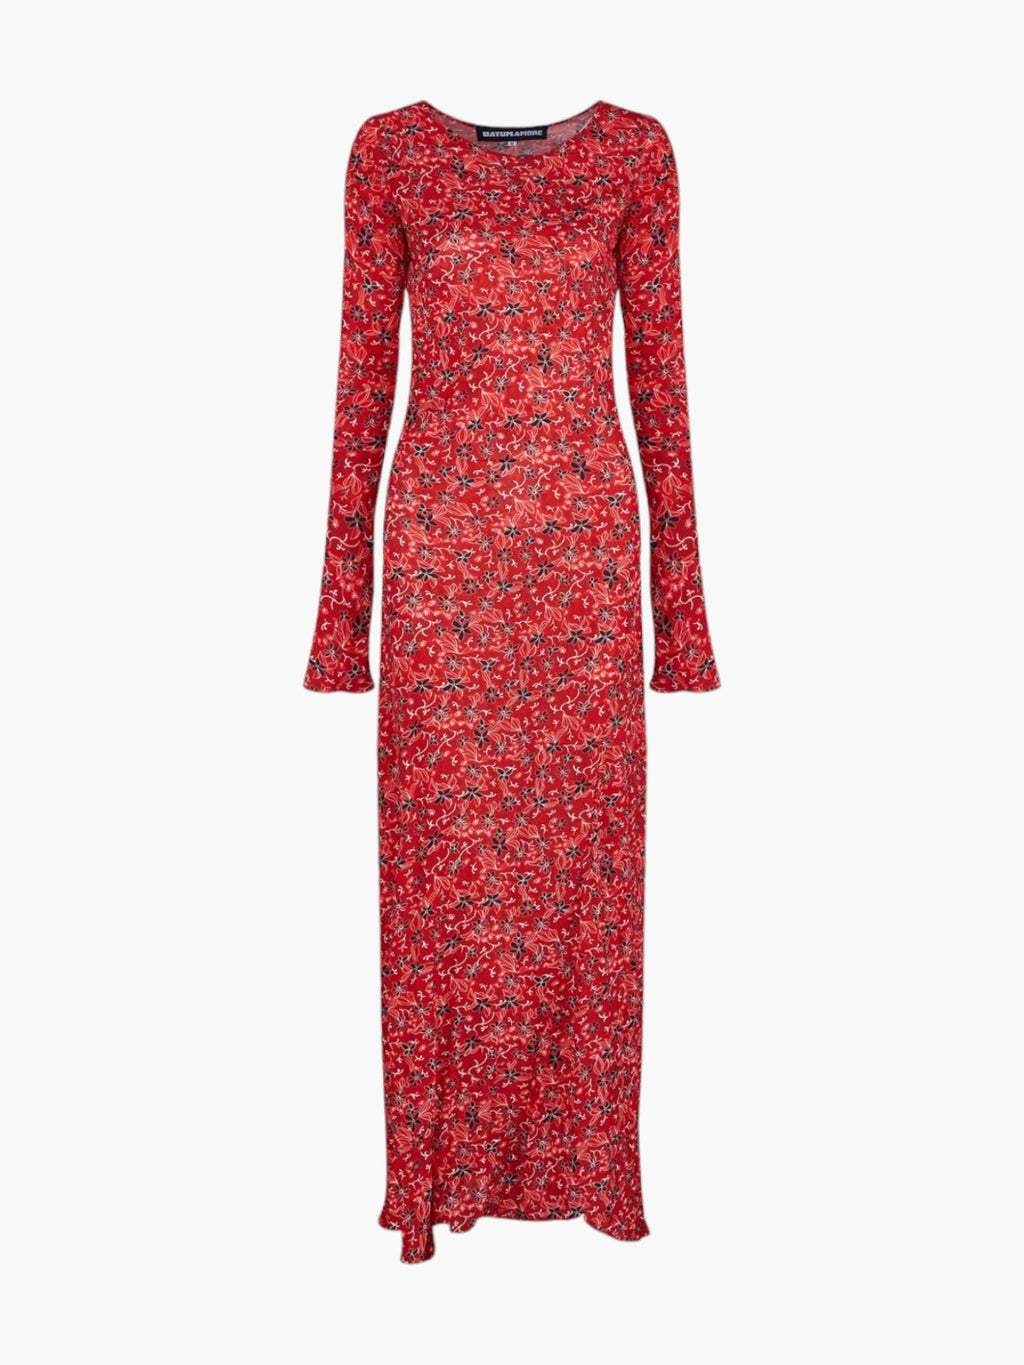 EXCLUSIVE Maria Long Dress | Red Floral